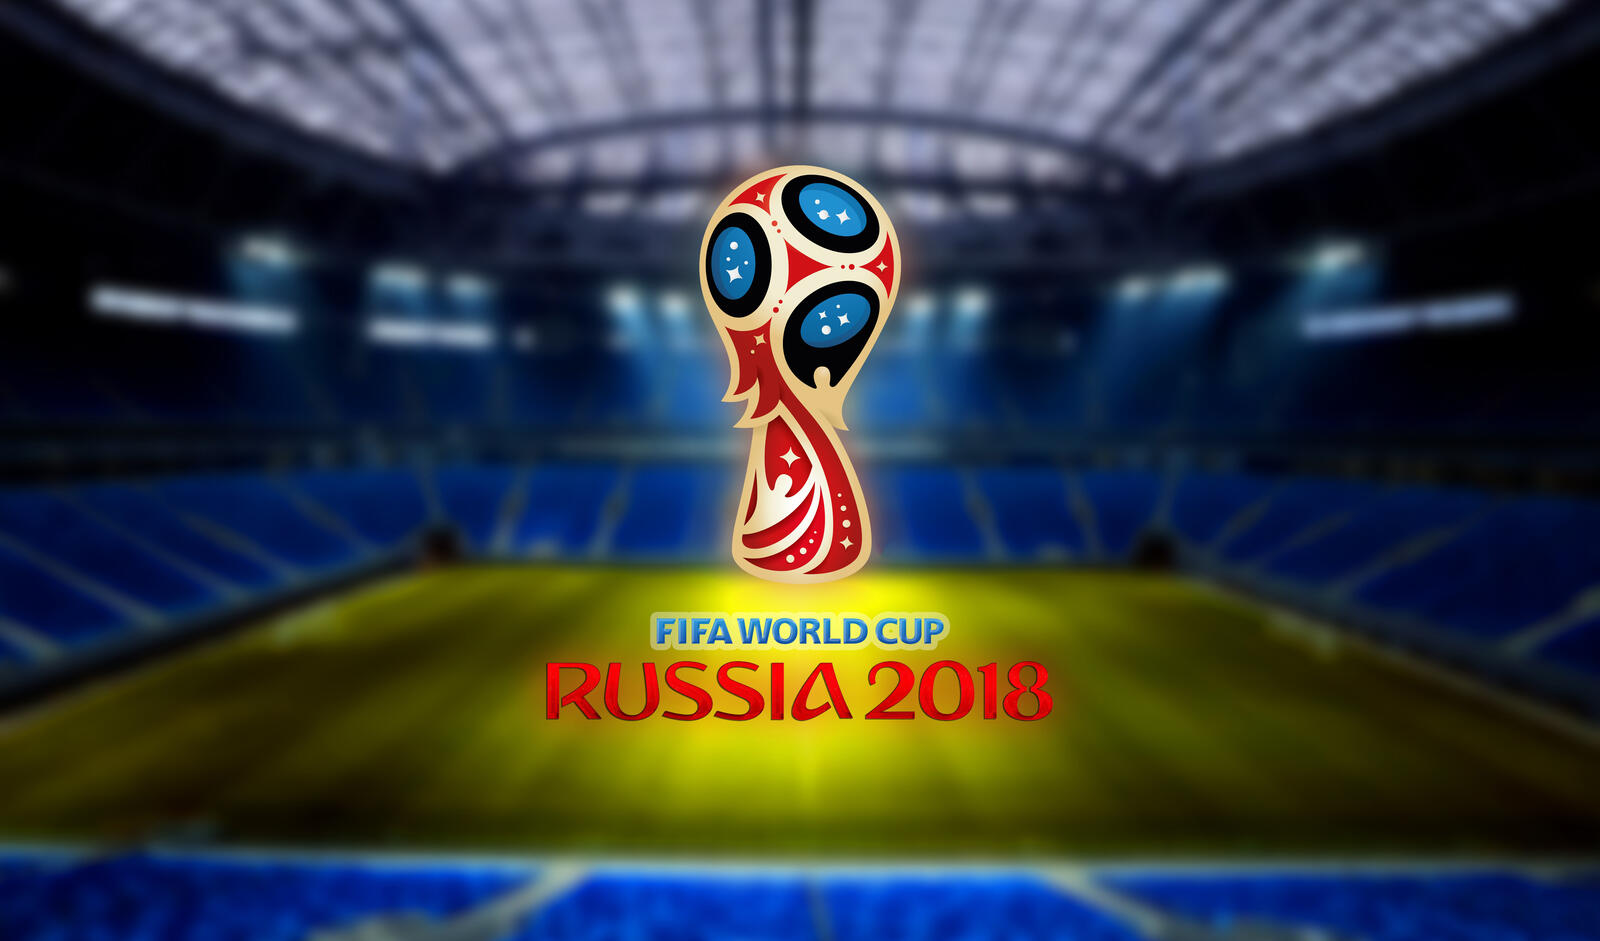 Wallpapers fifa world cup russia 2018 games games on the desktop